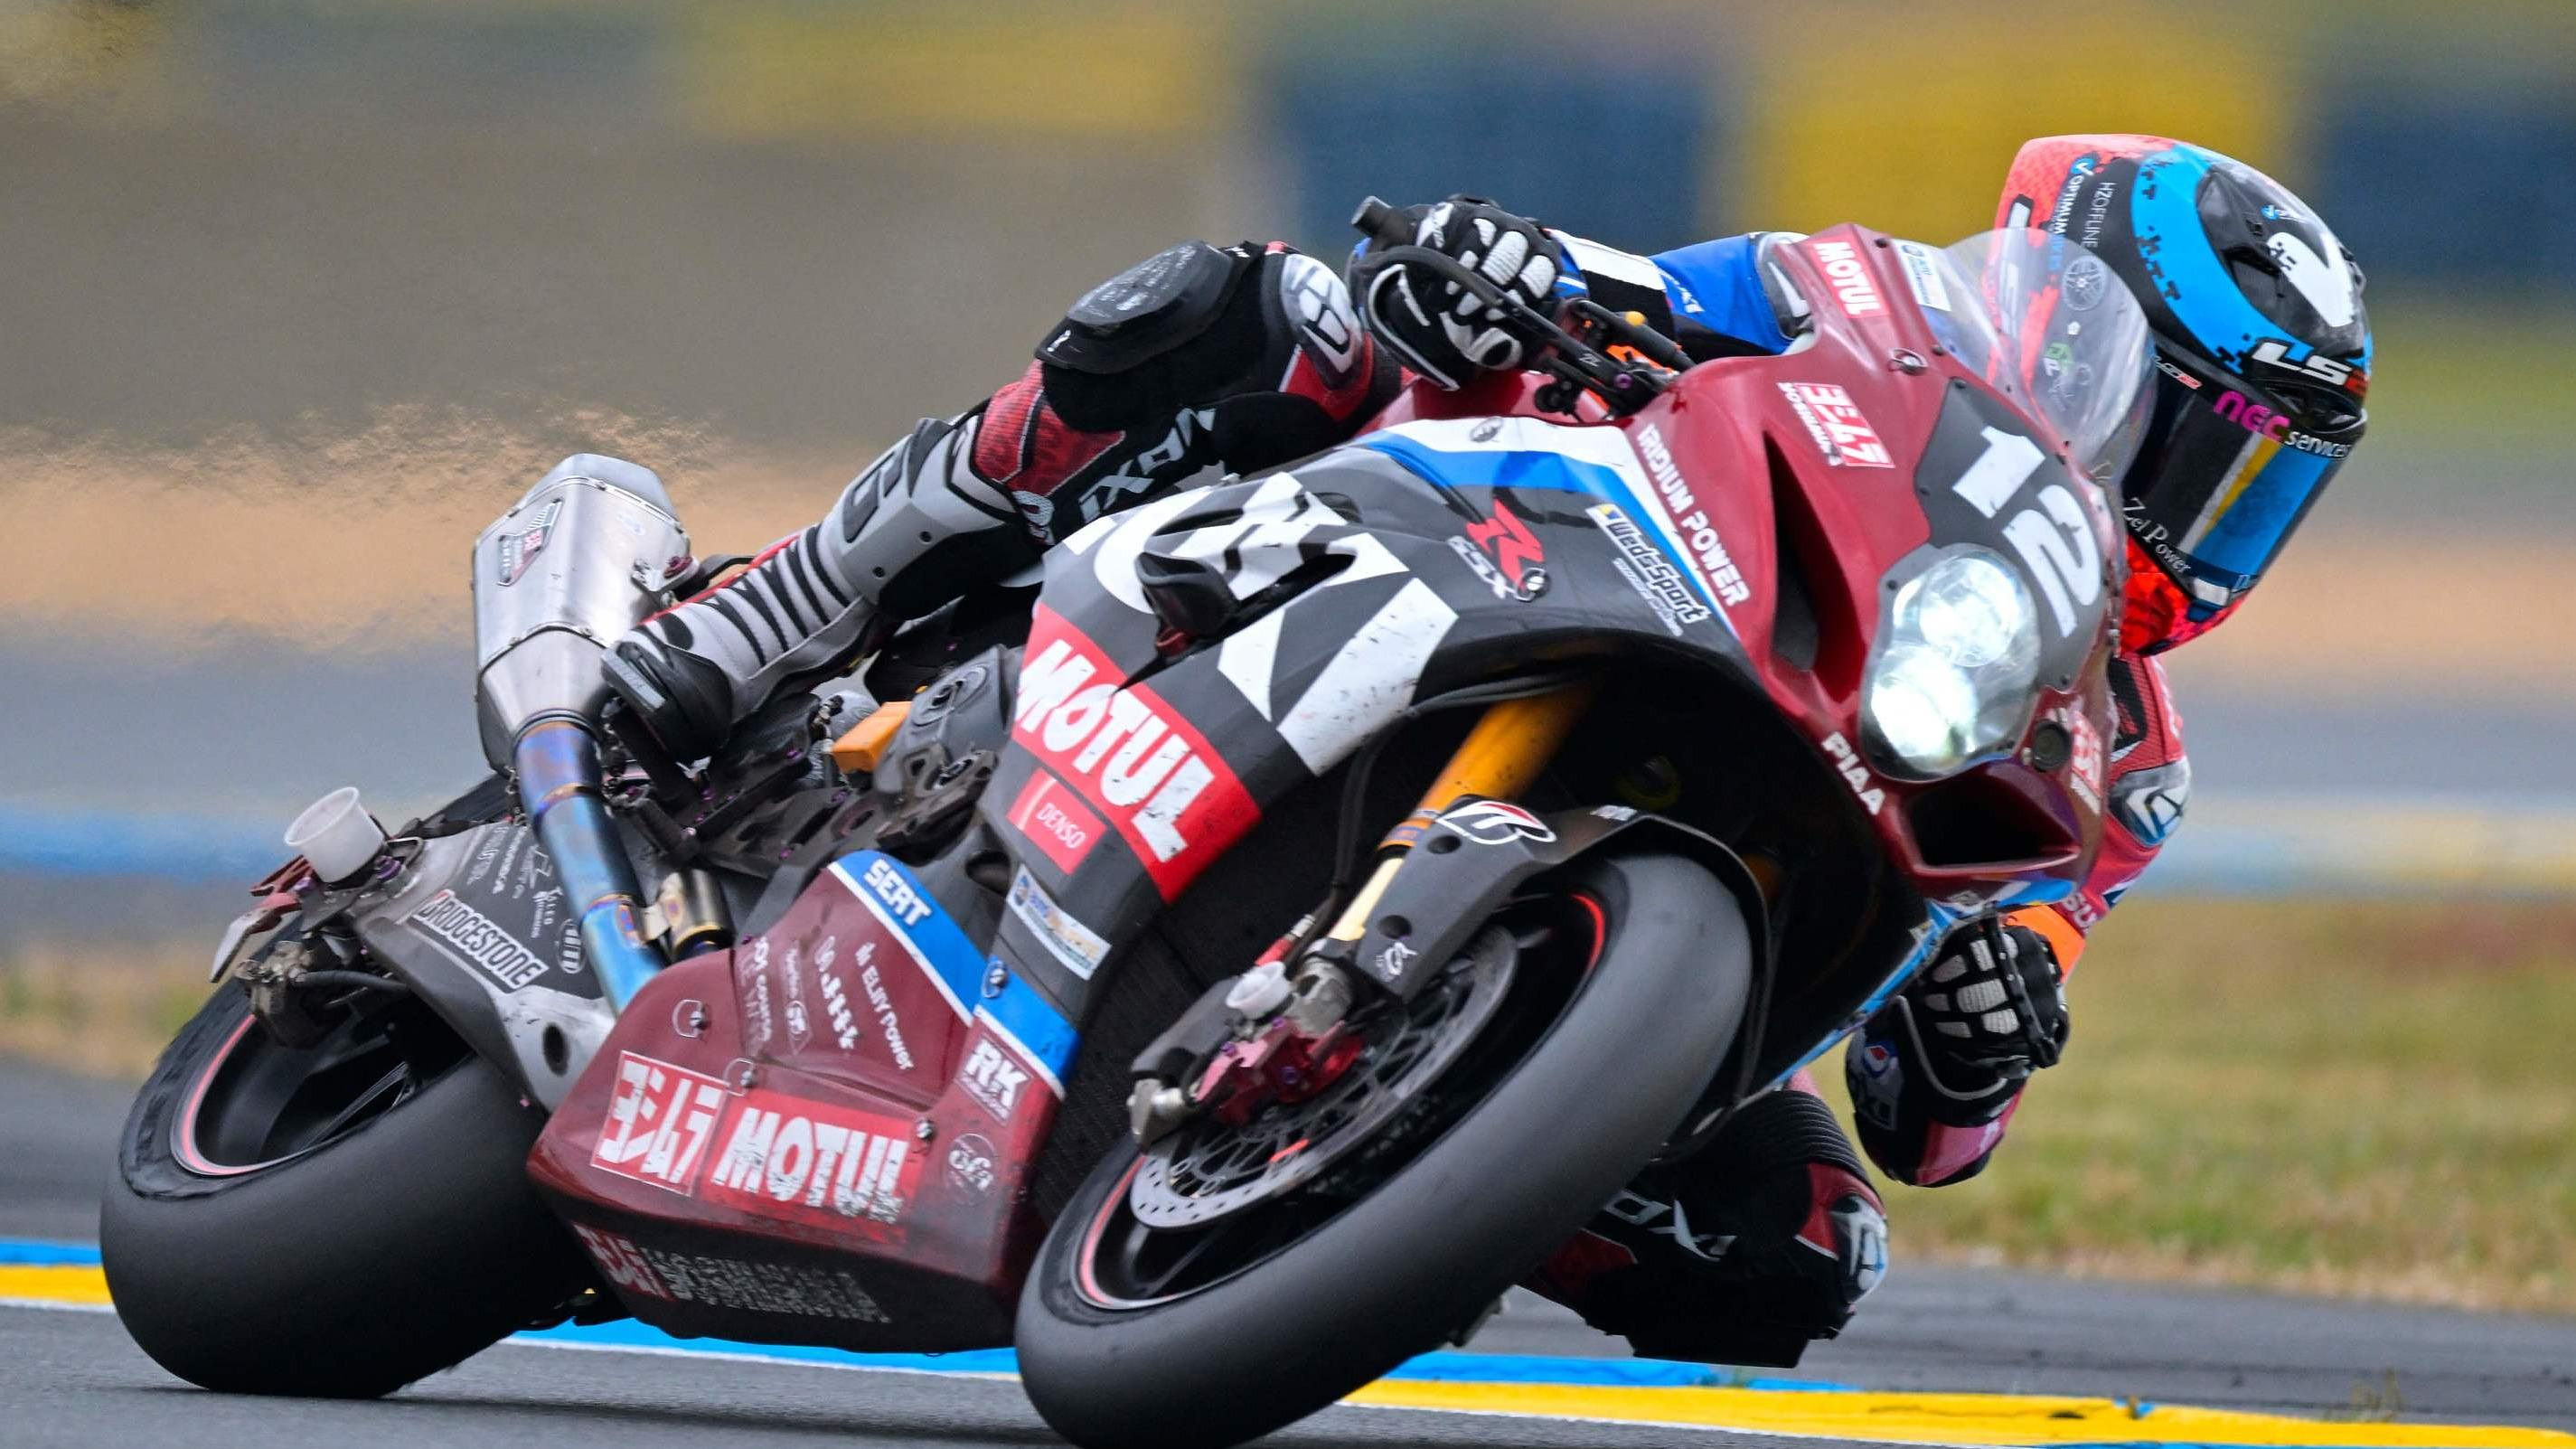 24 Hours of Le Mans Motorcycles: the SERT Suzuki wins after an indecisive race